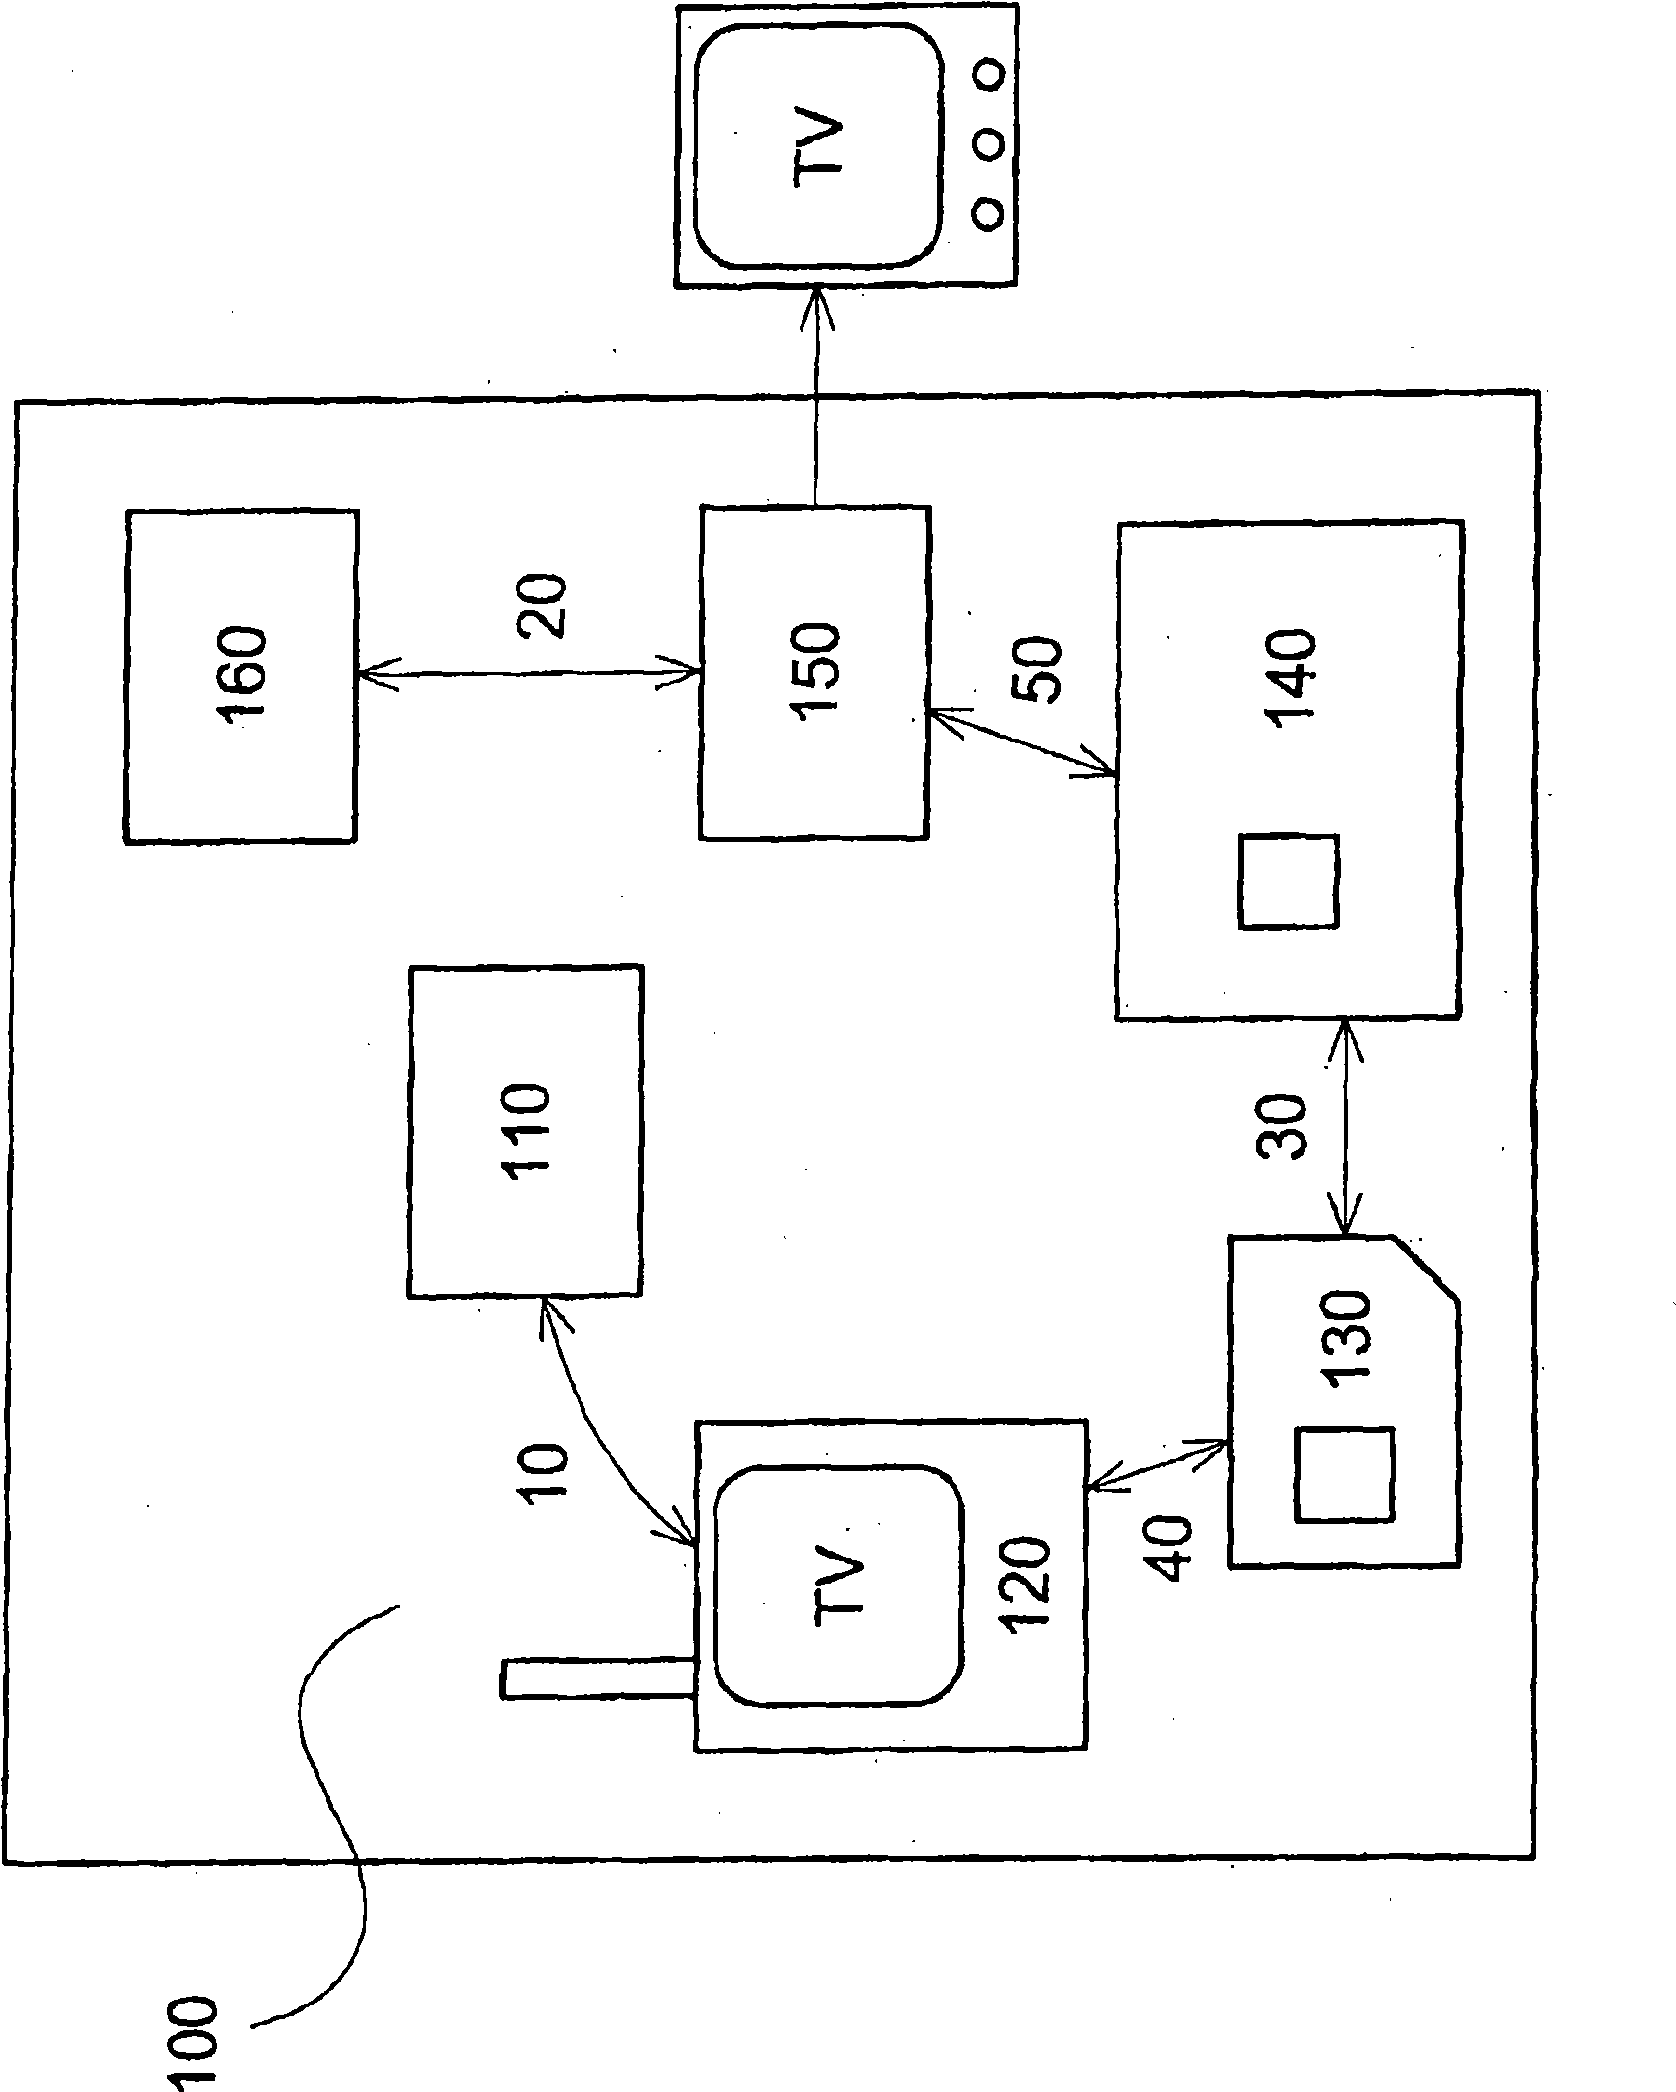 Method of transferring broadcast related information from a portable terminal to a nearby broadcast receiver